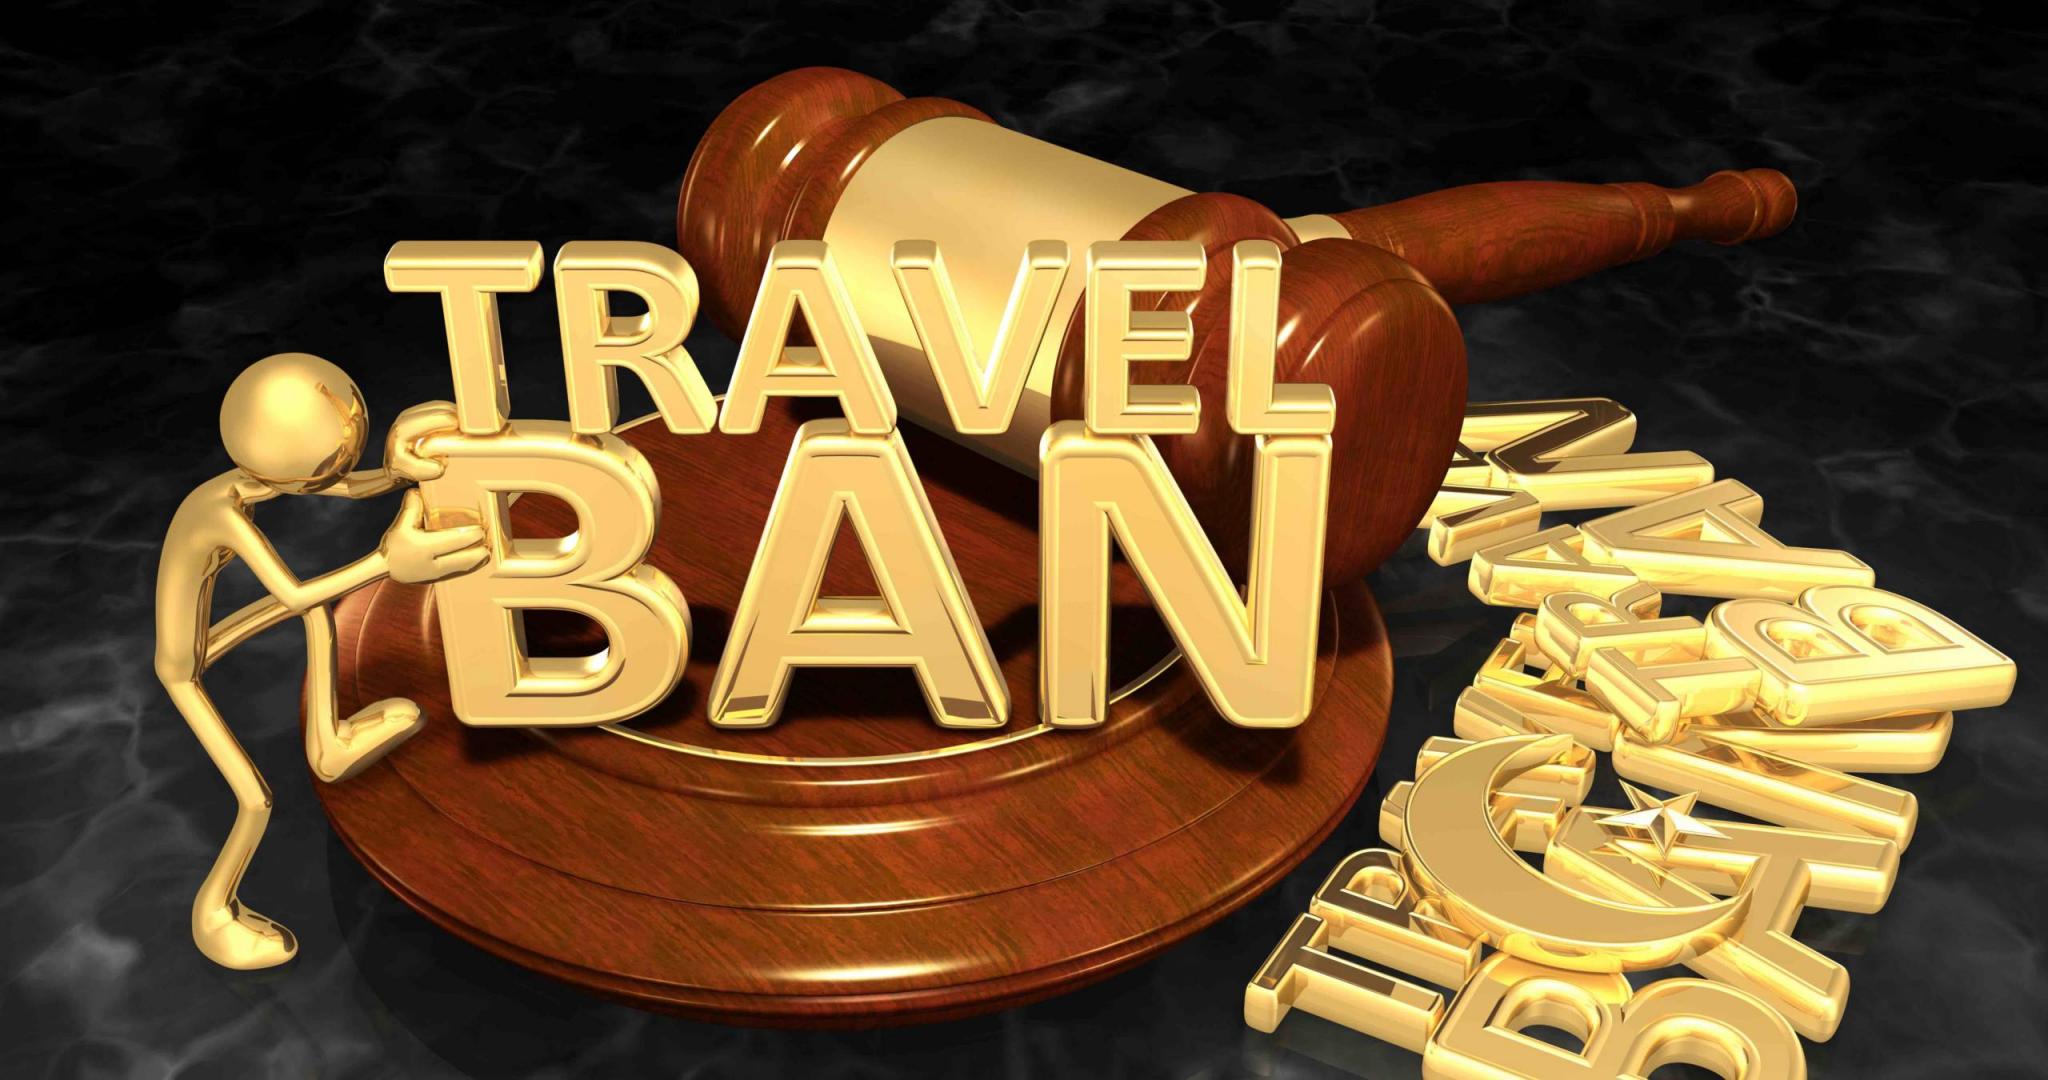 a travel ban meaning